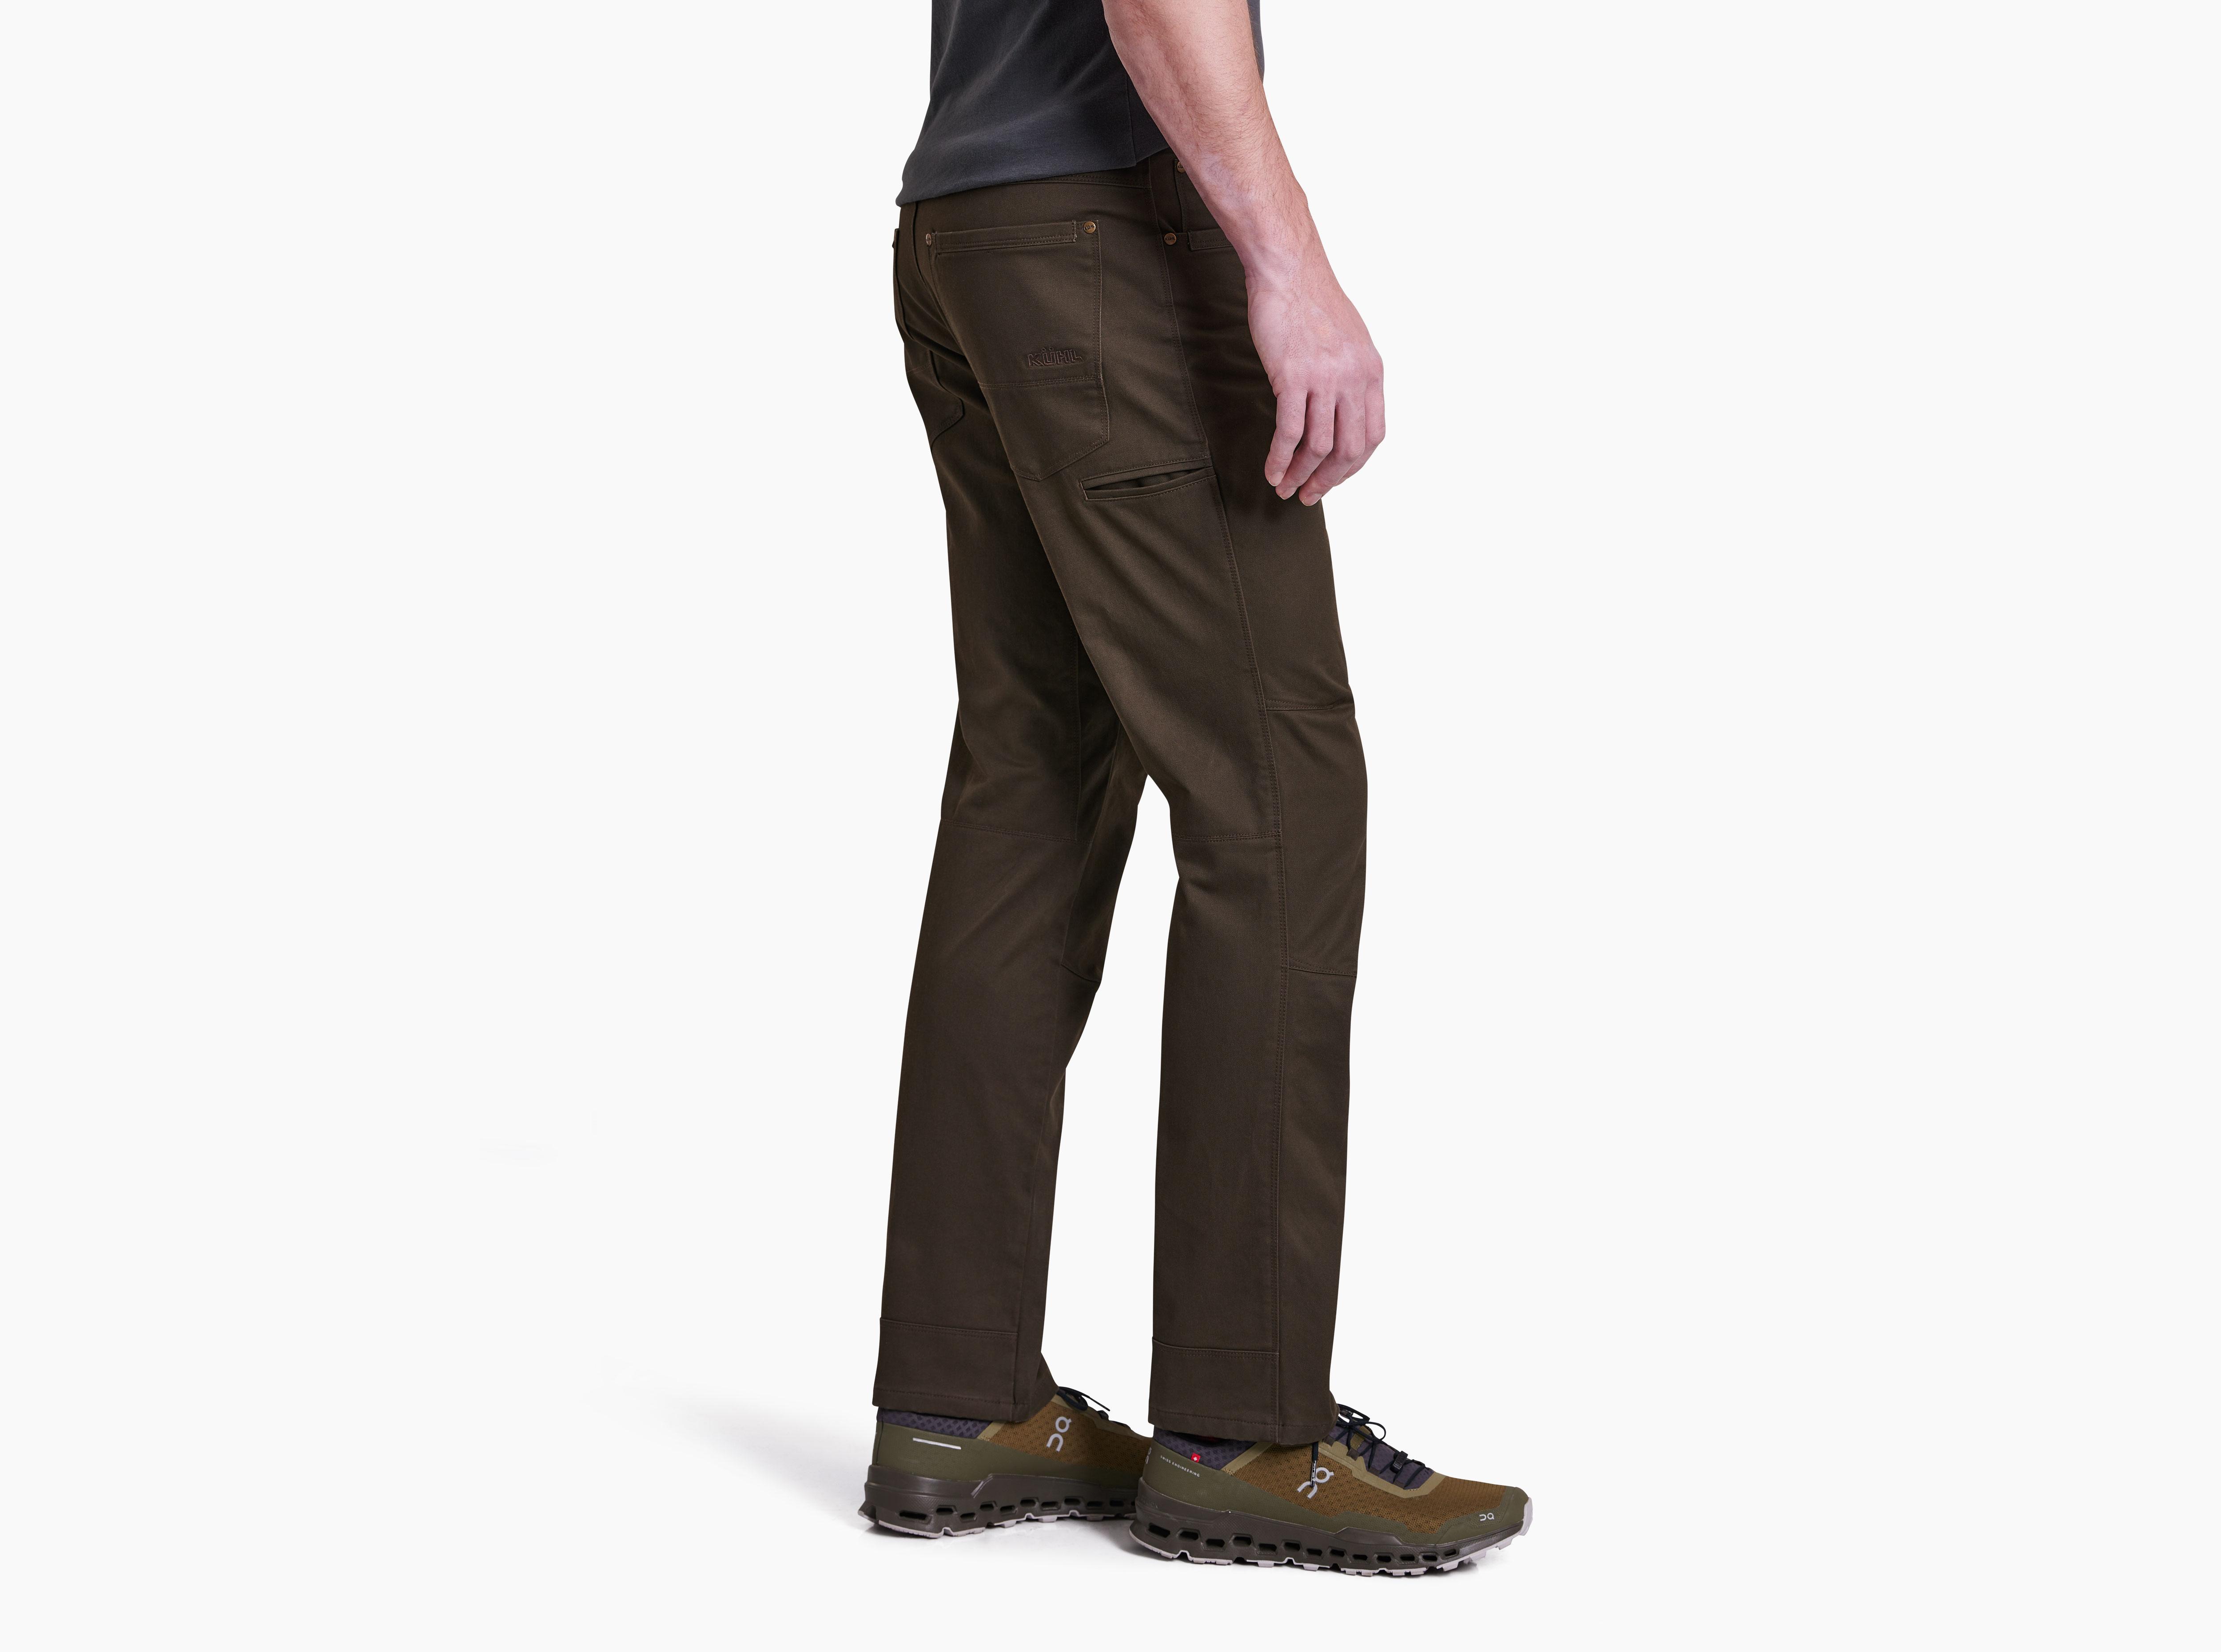 KUHL Rydr Pant - The Bent Rod